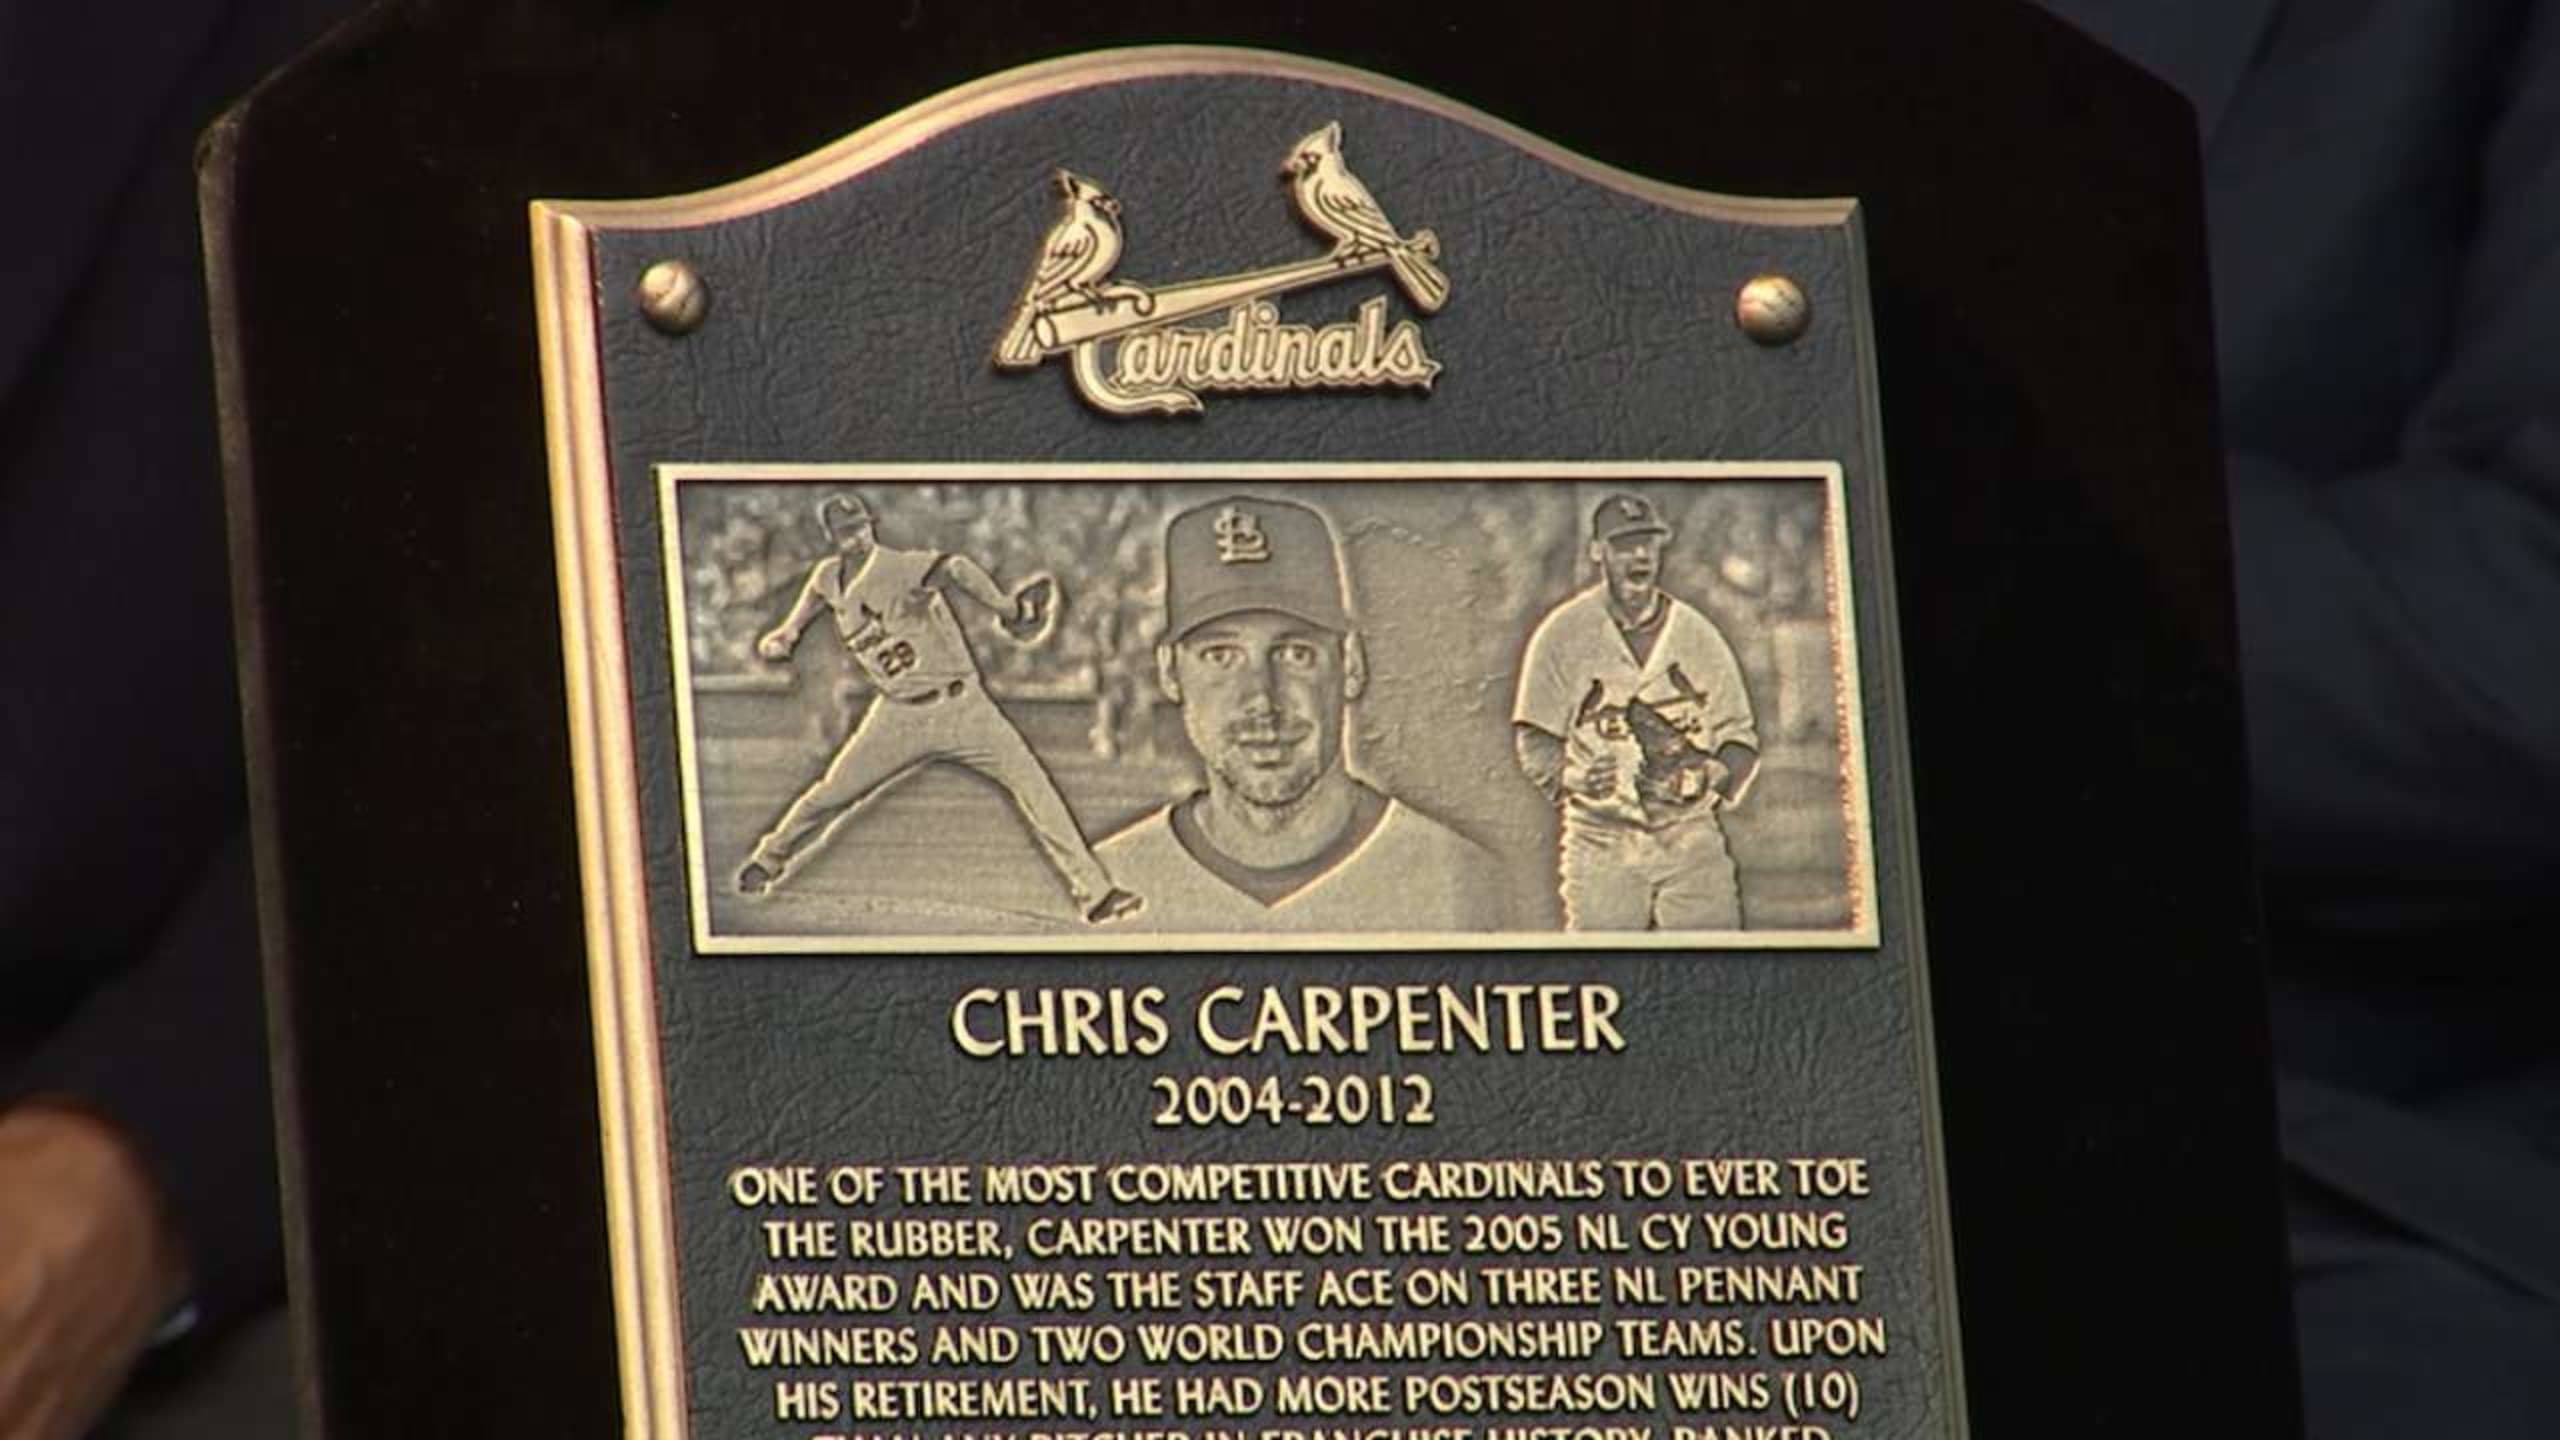 Chris Carpenter 2005 Highlights, On this day in 2005, Chris Carpenter  received the NL Cy Young Award. Relive some of his biggest moments from  that incredible season.